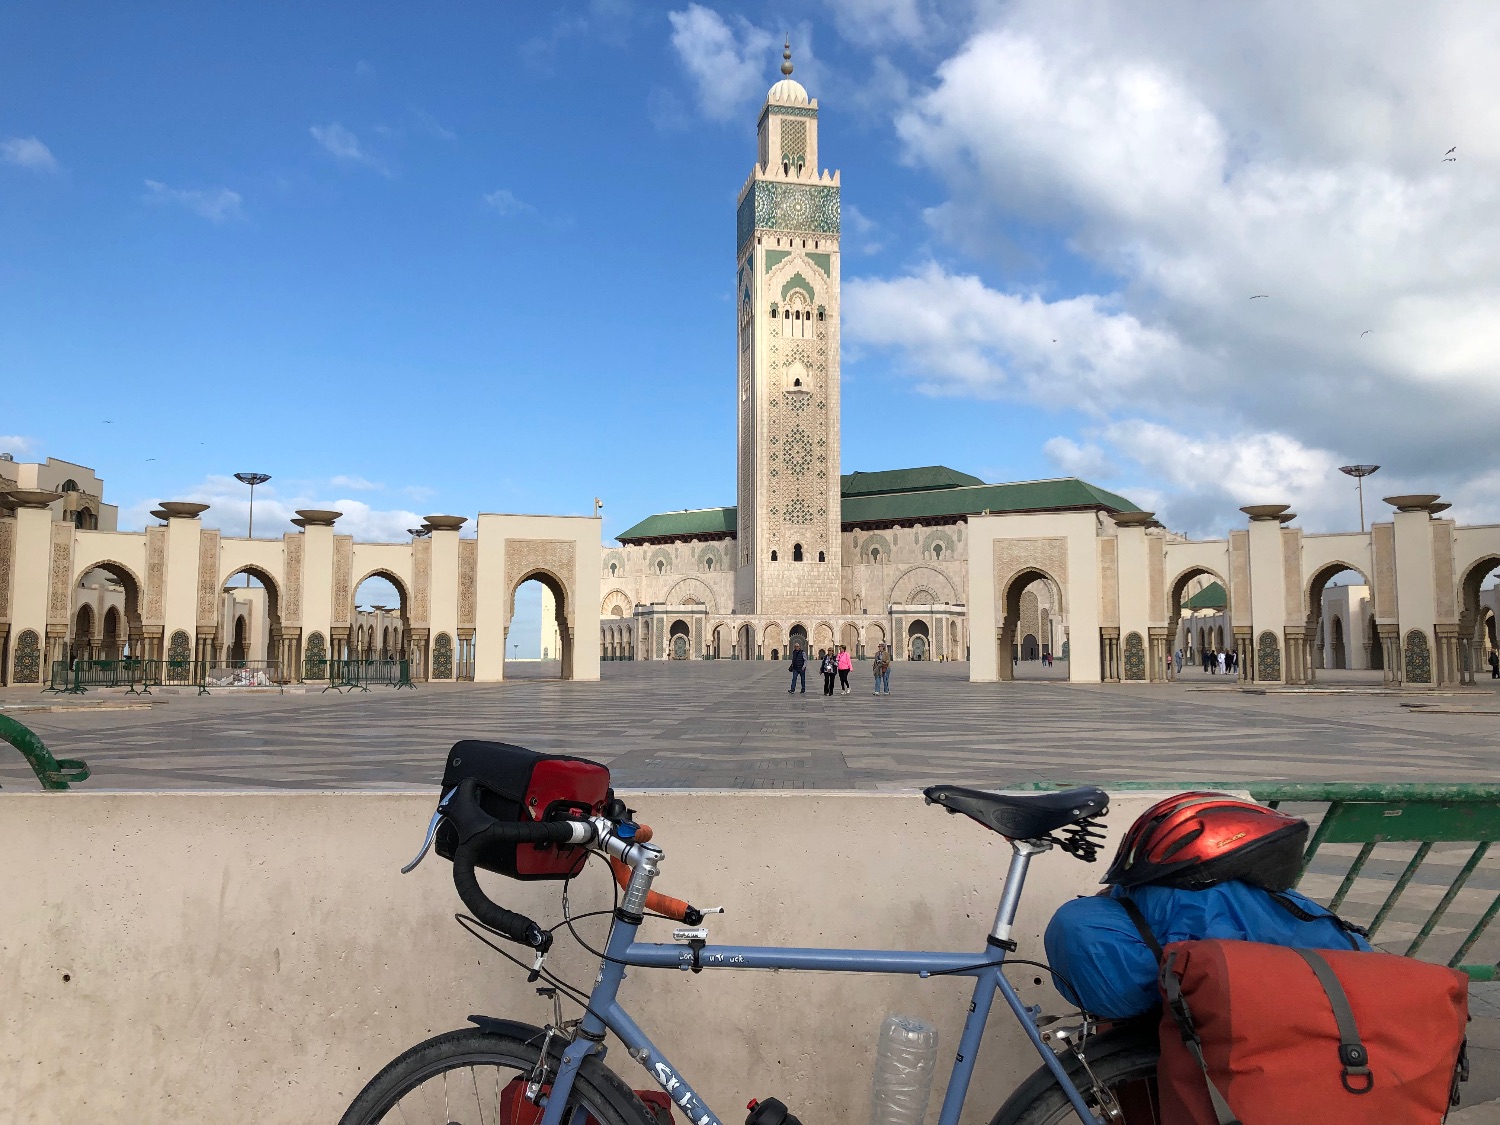 One of the world's biggest mosques, in Casablanca